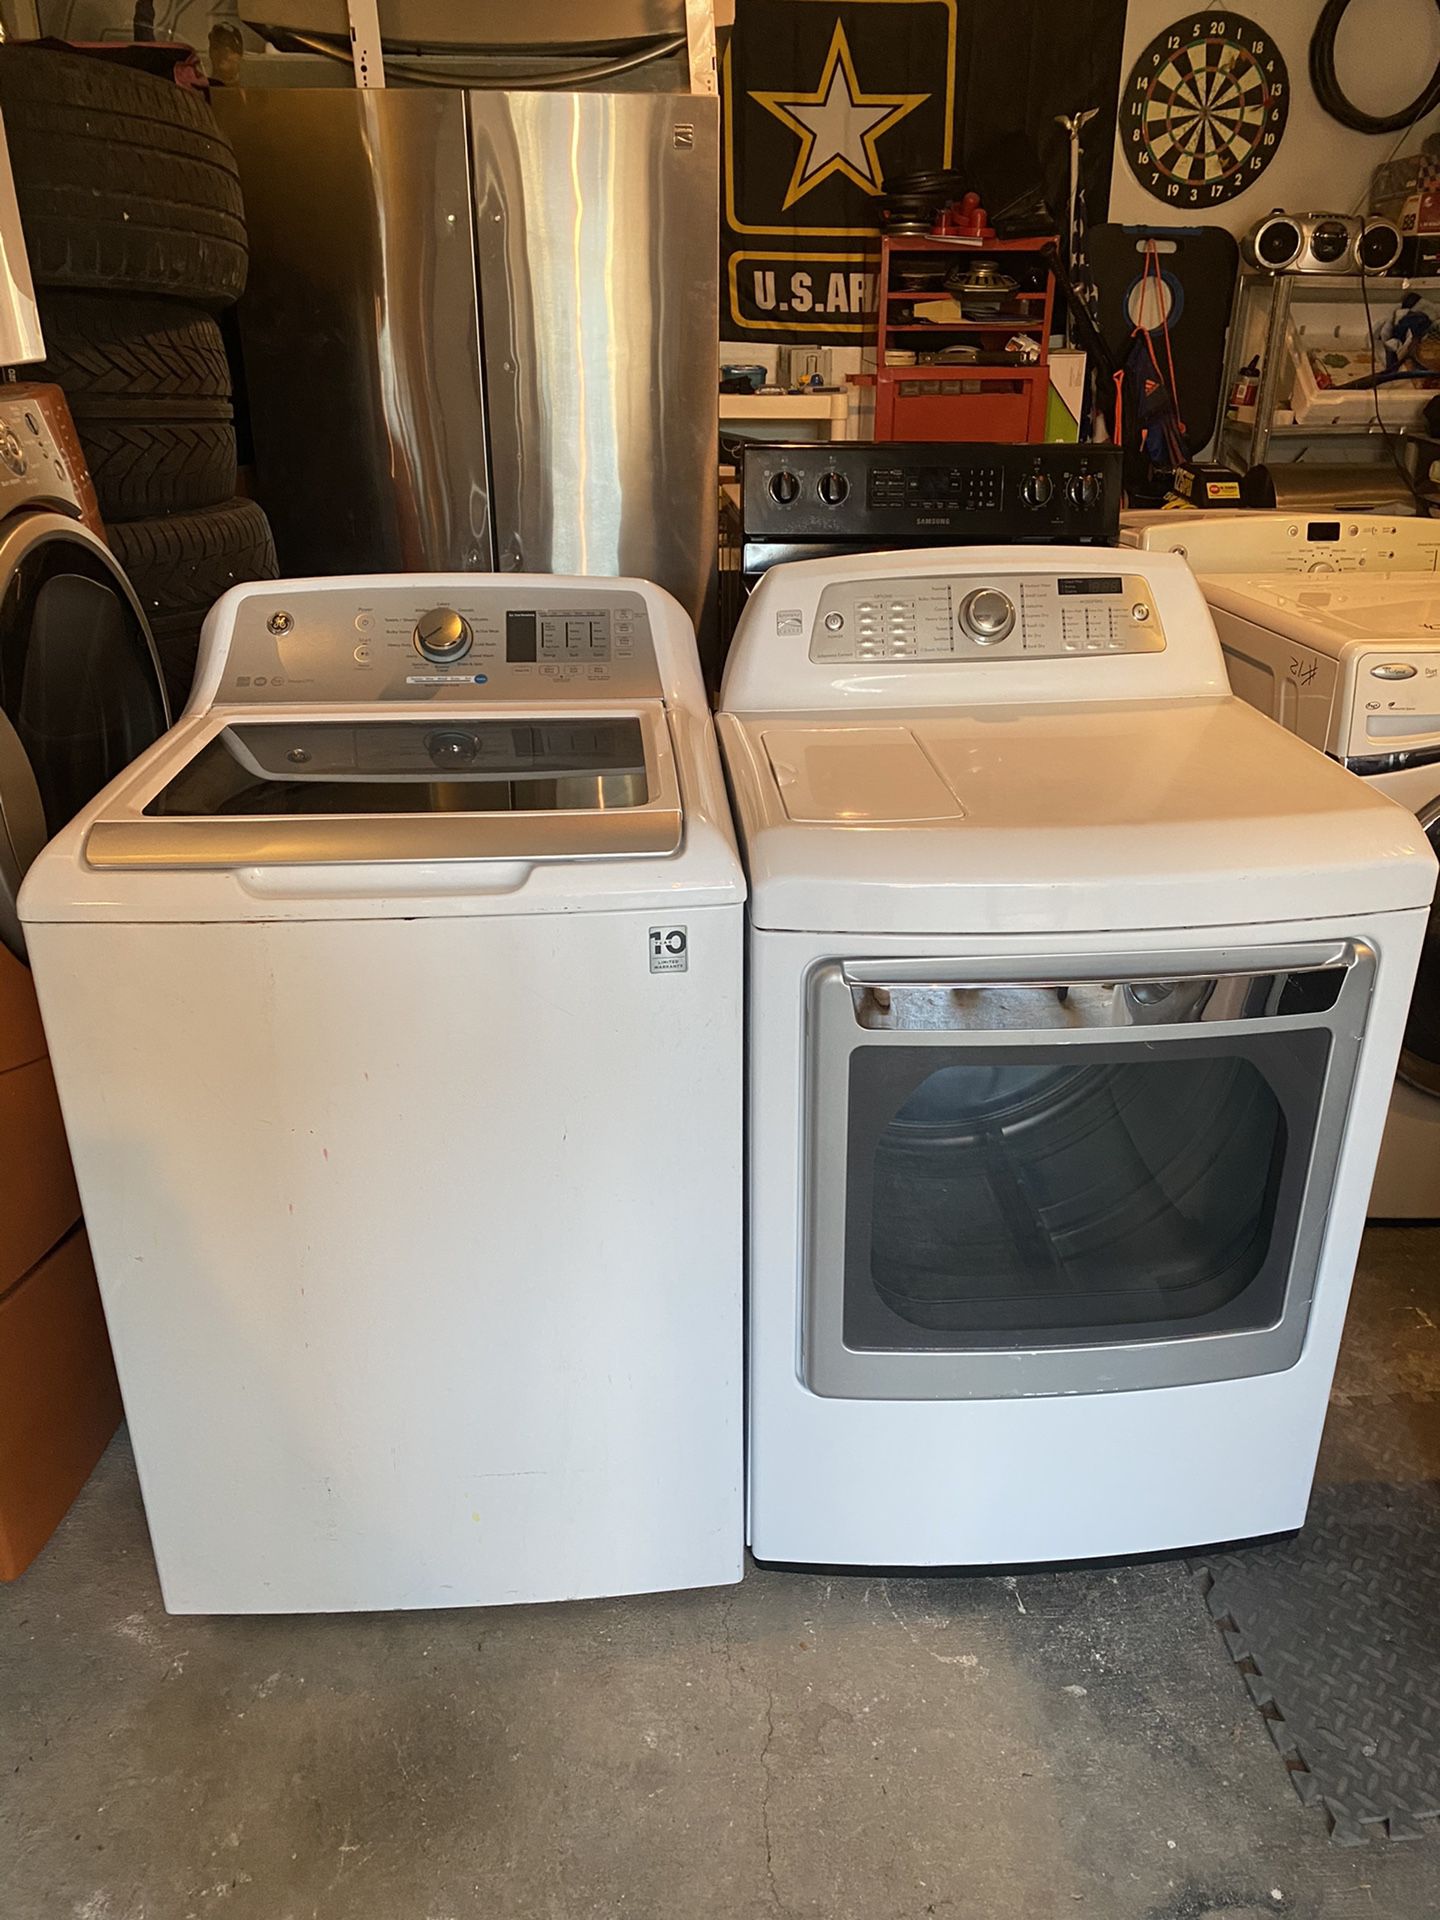 GE washer and Kenmore dryer set